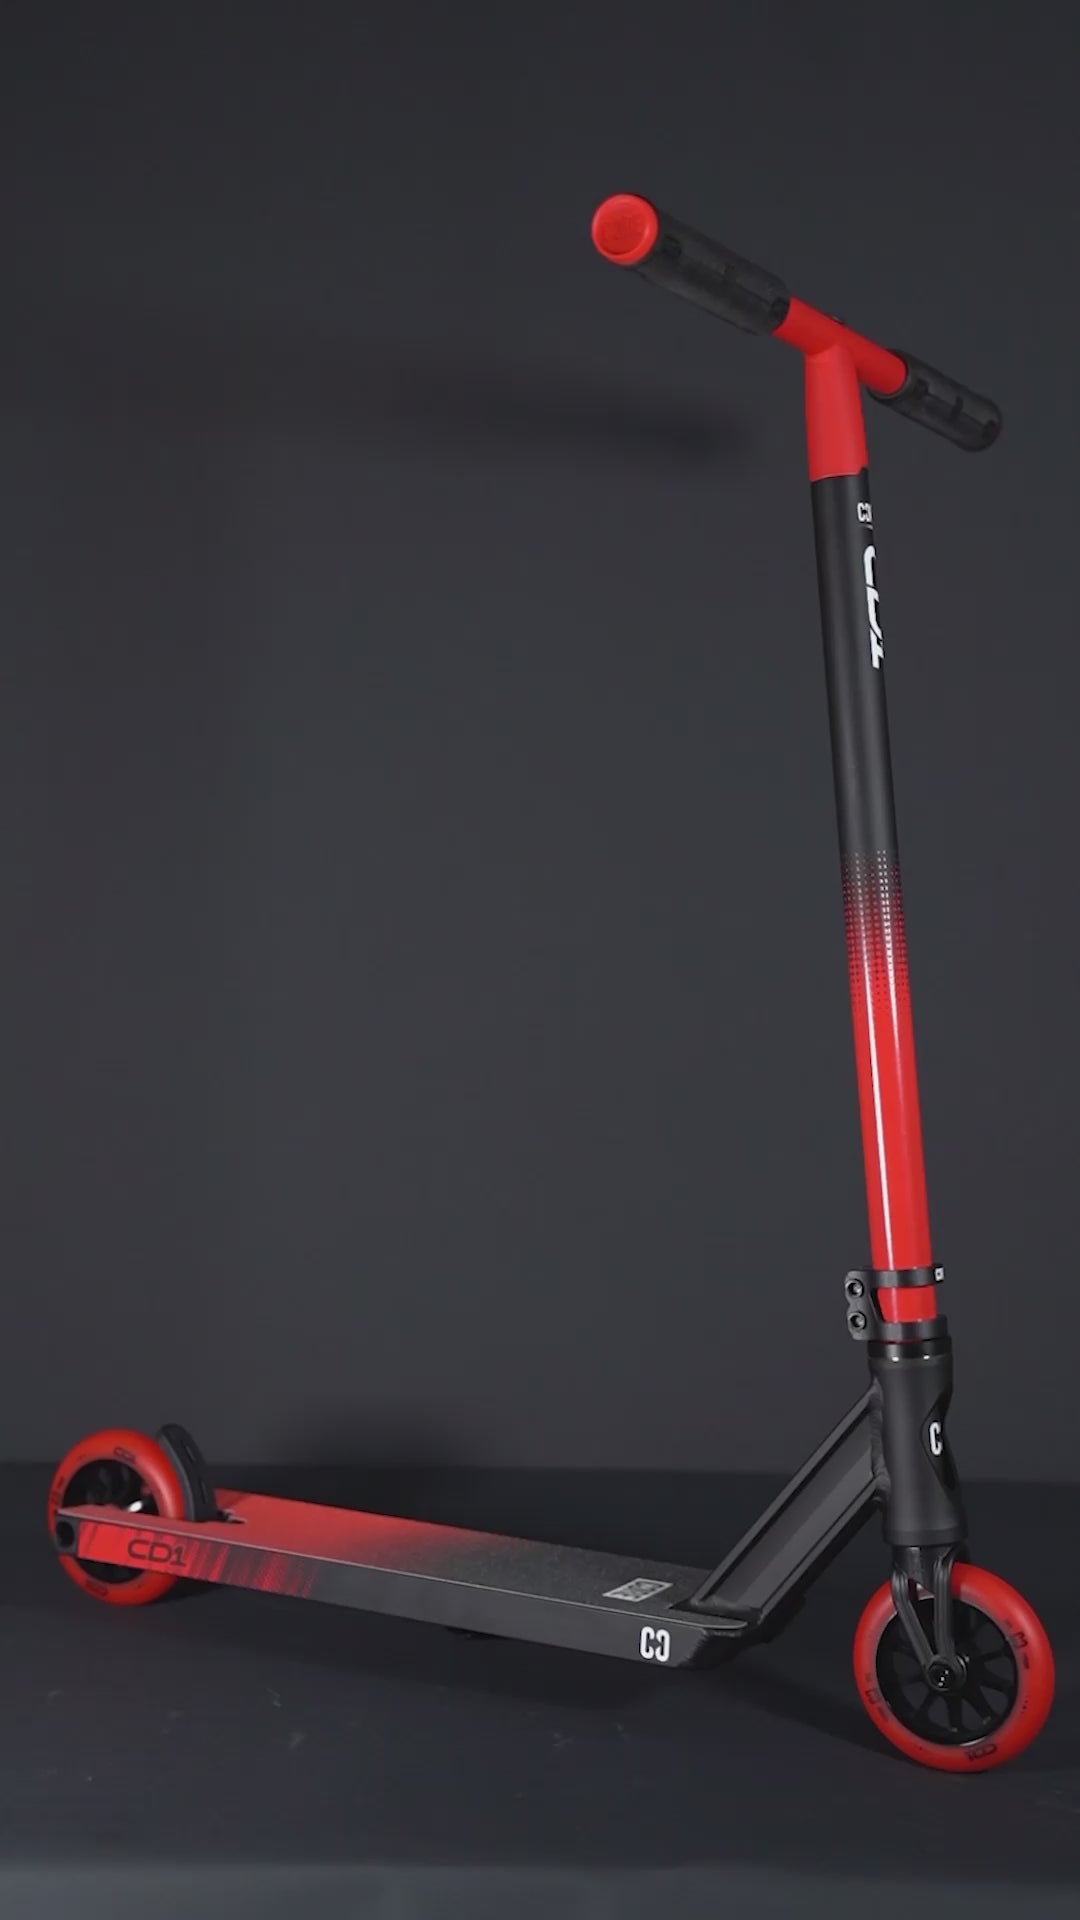 CORE CD1 Complete Stunt Scooter Red & Black I Adult Stunt Scooter Video